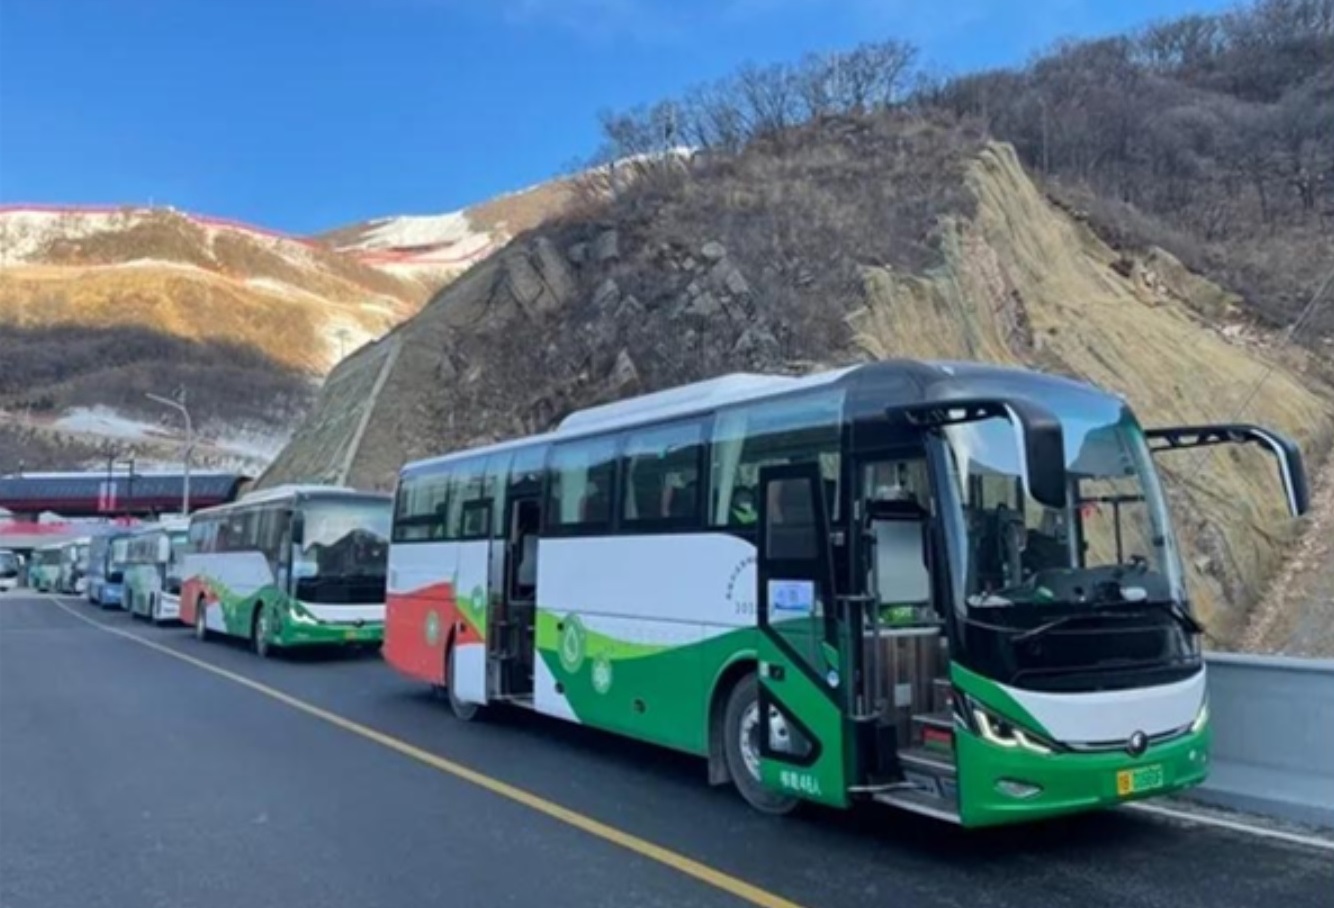 Hydrogen fuel cell buses at the 2022 Beijing Winter Olympic Games